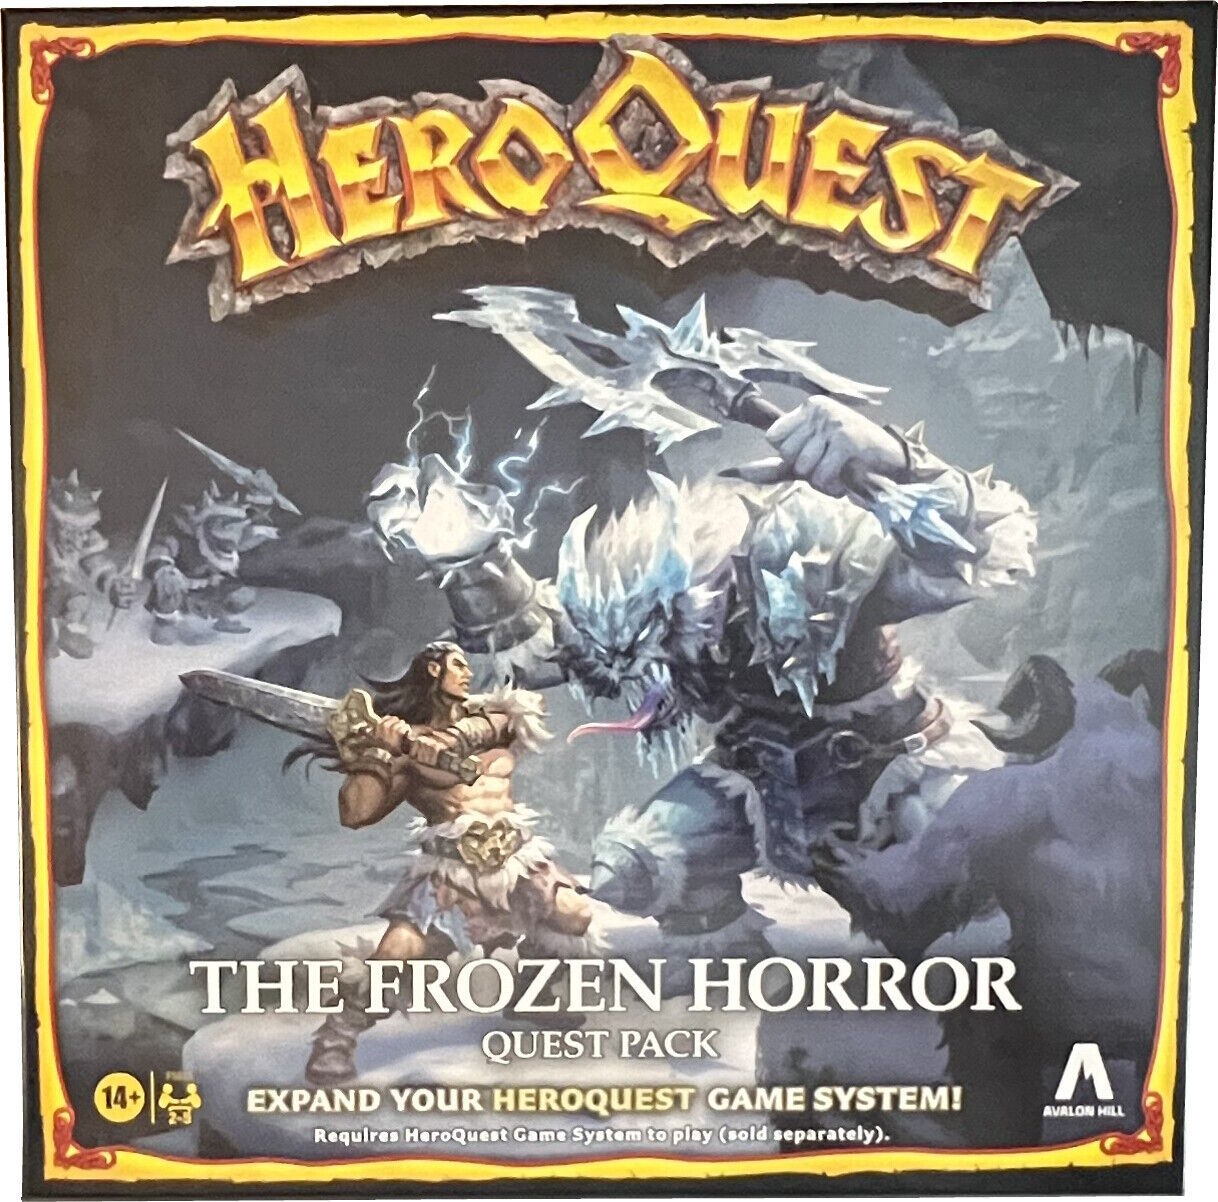 Hero Quest individual replacement pieces Barbarian Quest Pack The Frozen Horror - $2.99 - $29.99